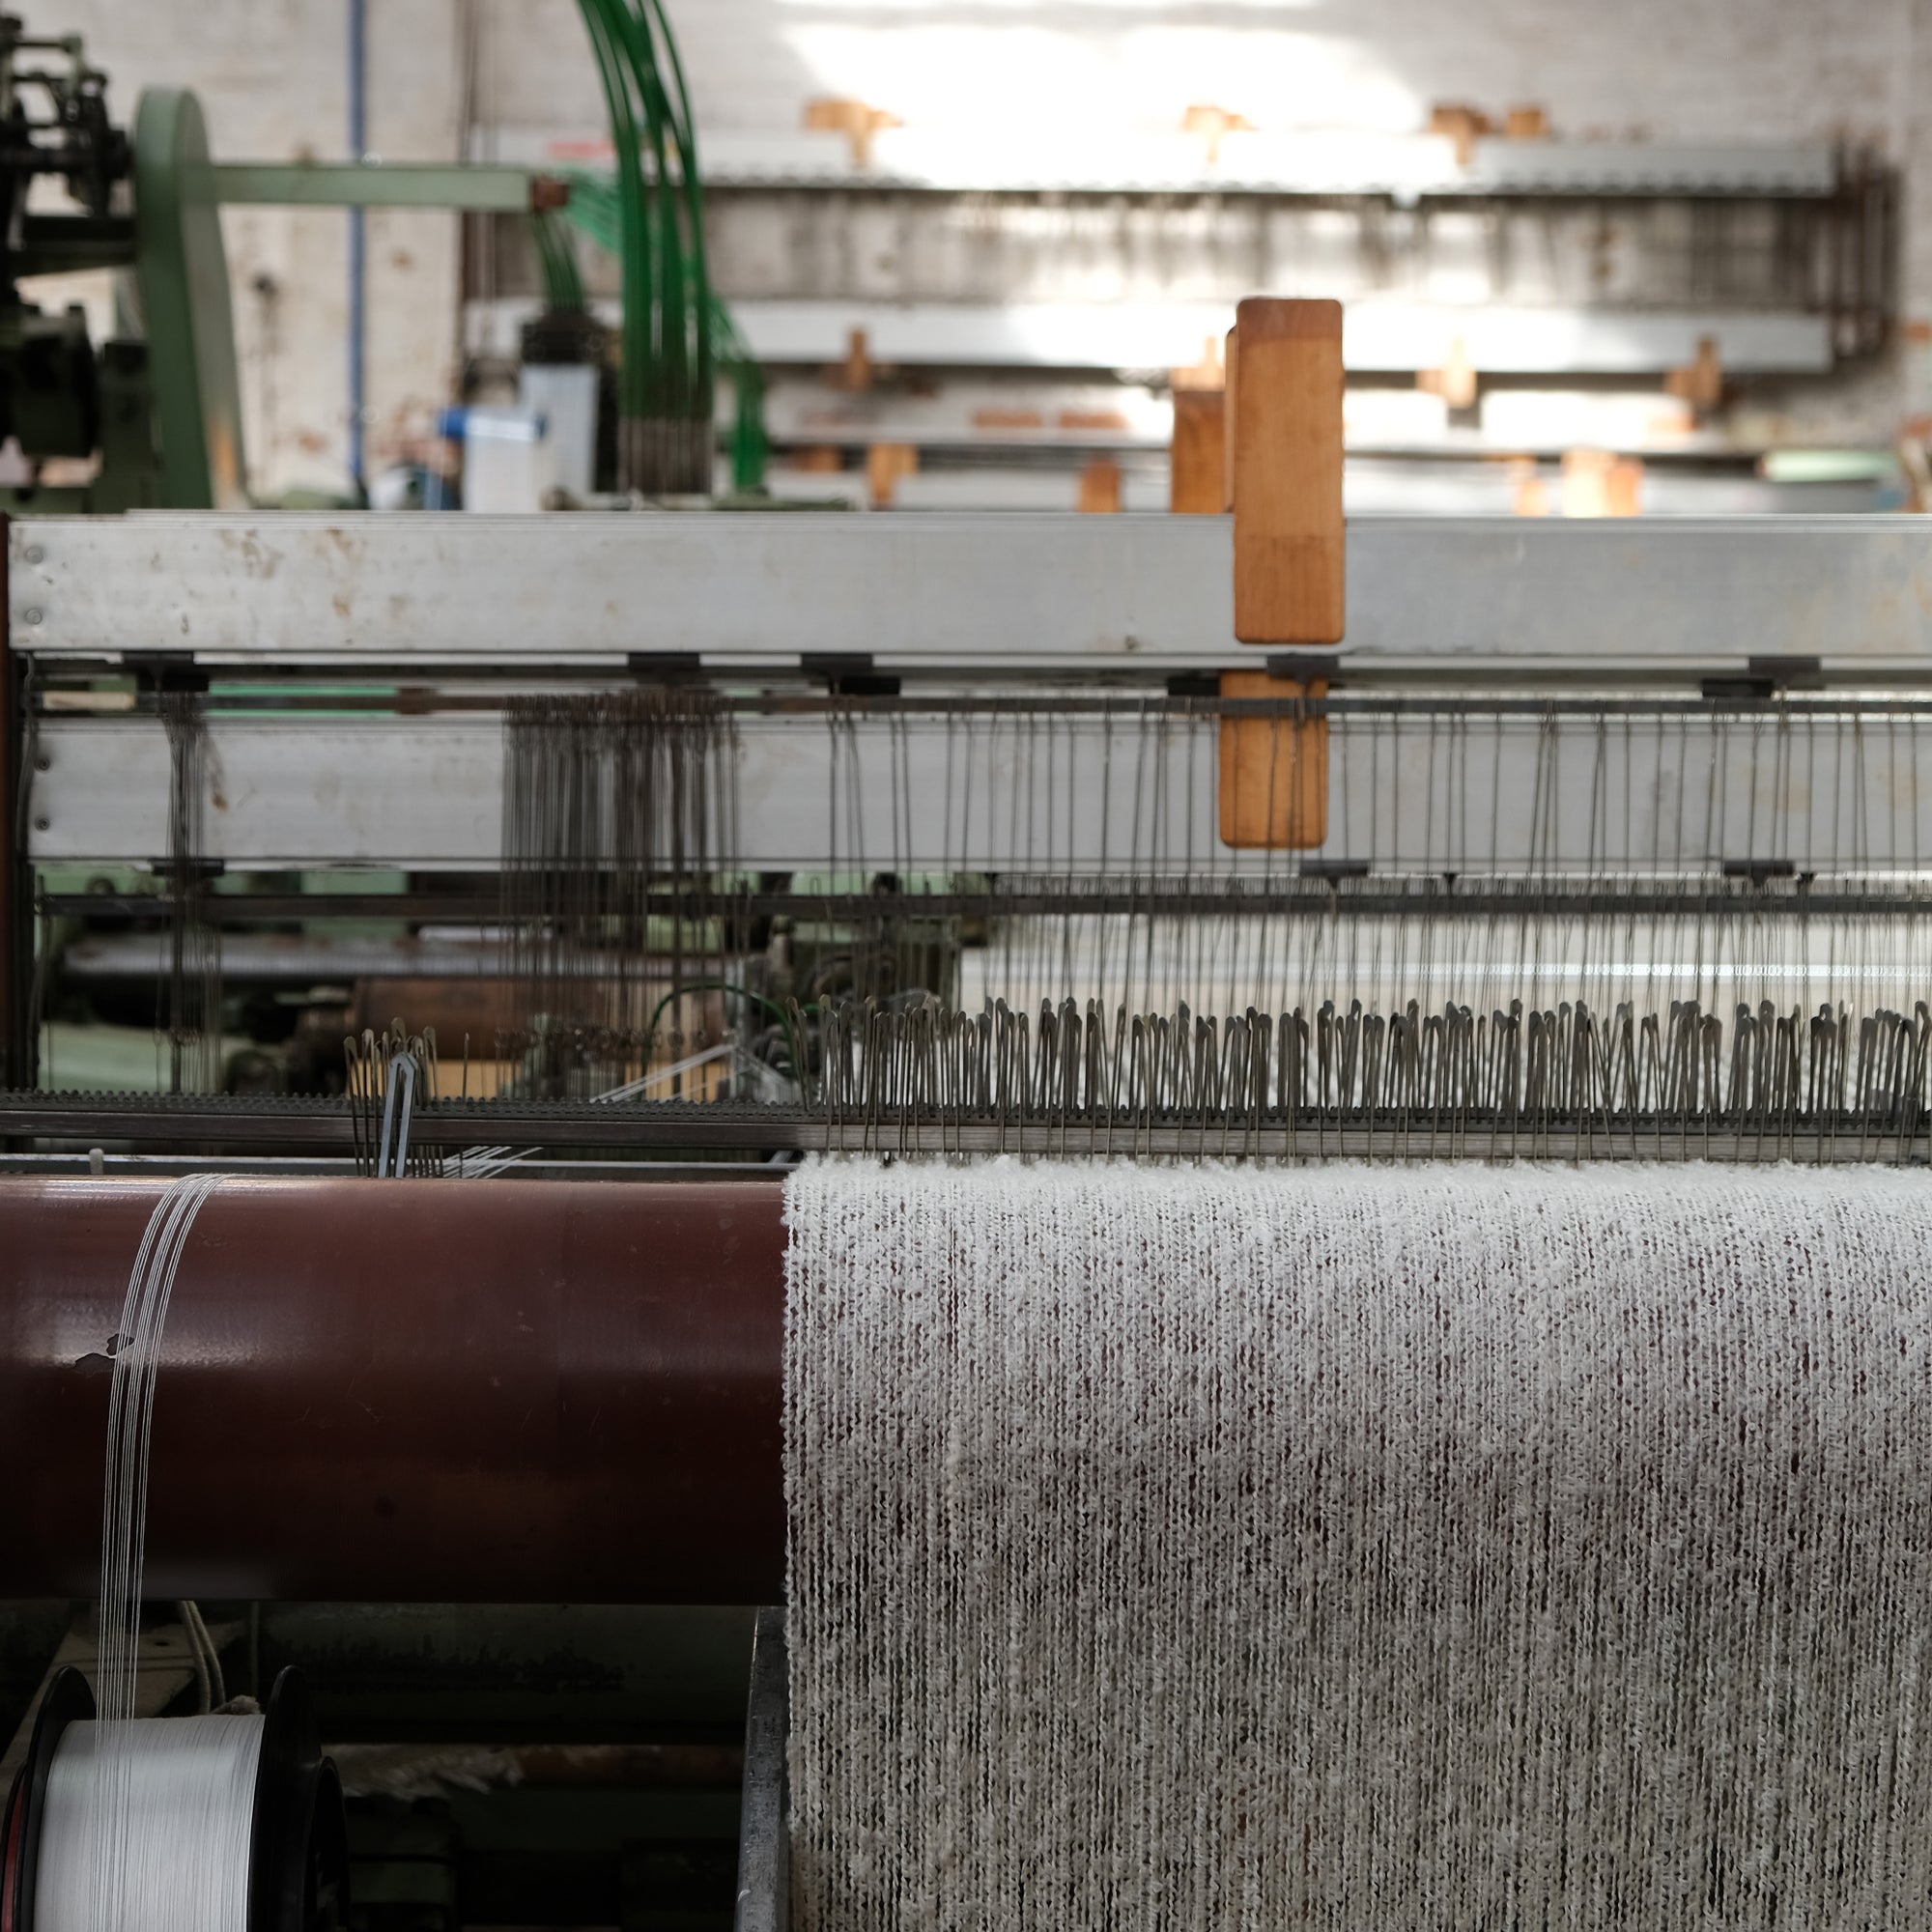 Natural Cooper's cormo boucle yarn on the loom.